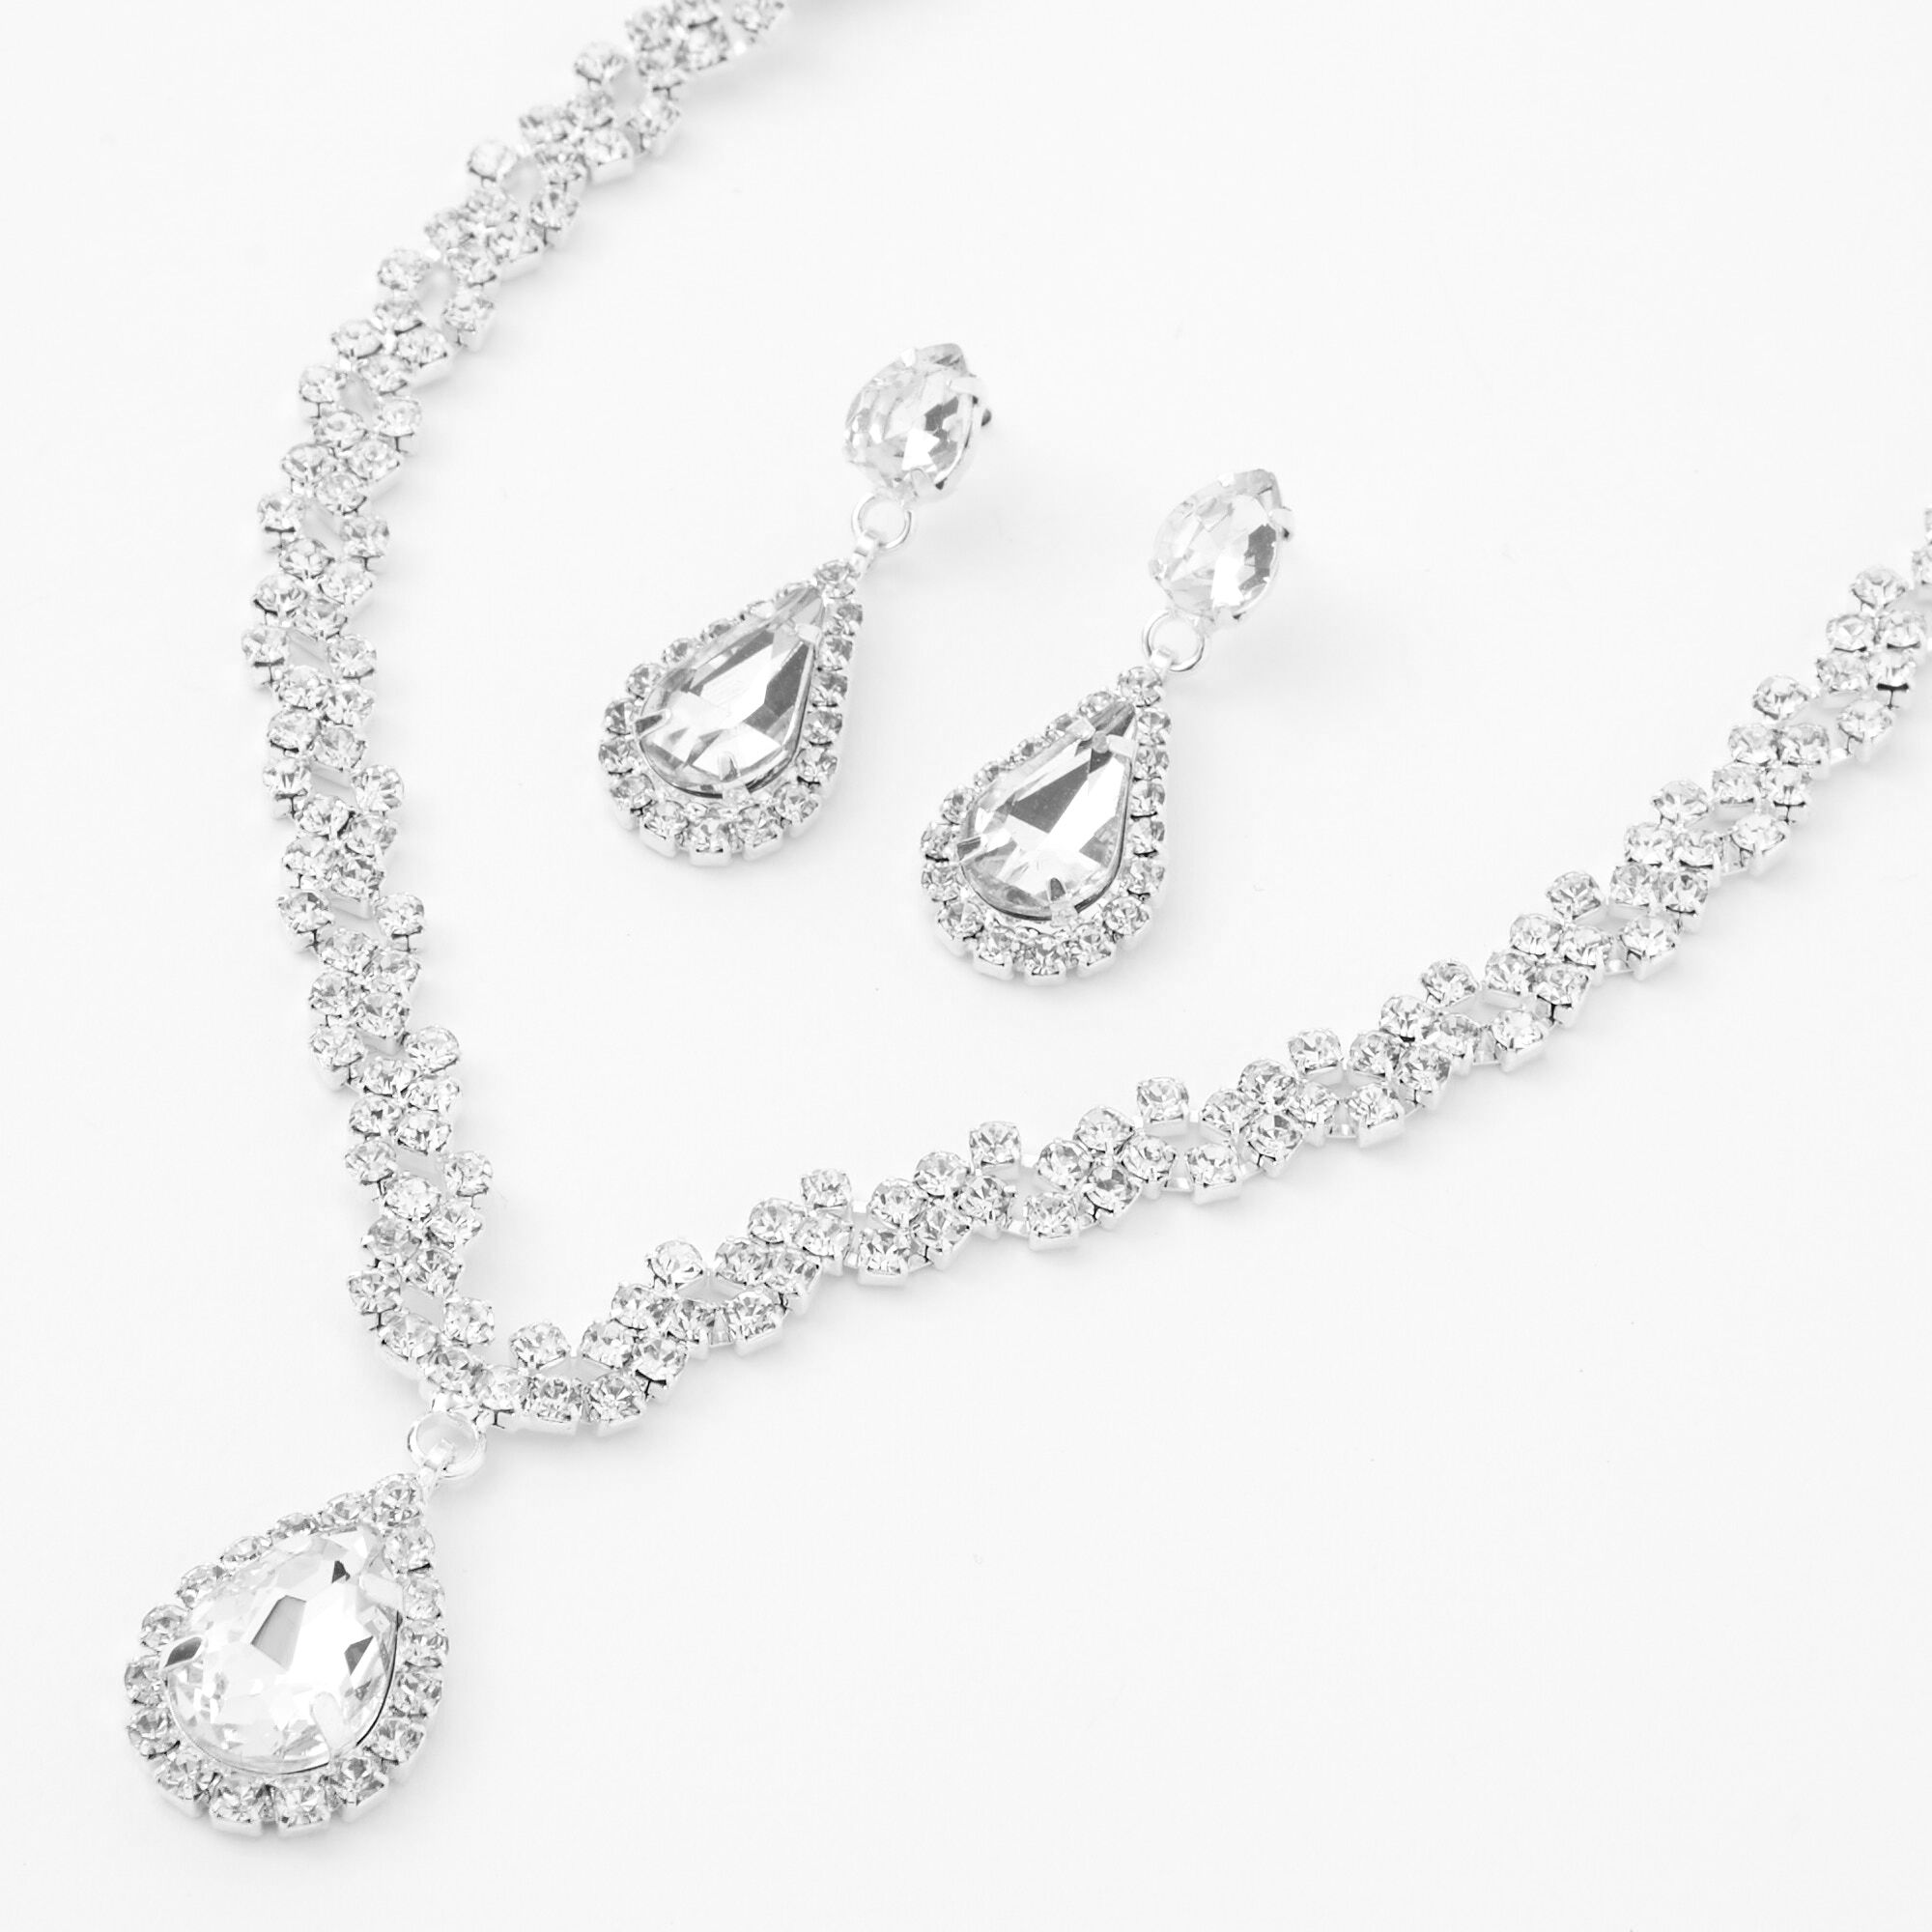 View Claires Tone Crystal Teardrop VNeck Jewelry Set 2 Pack Silver information